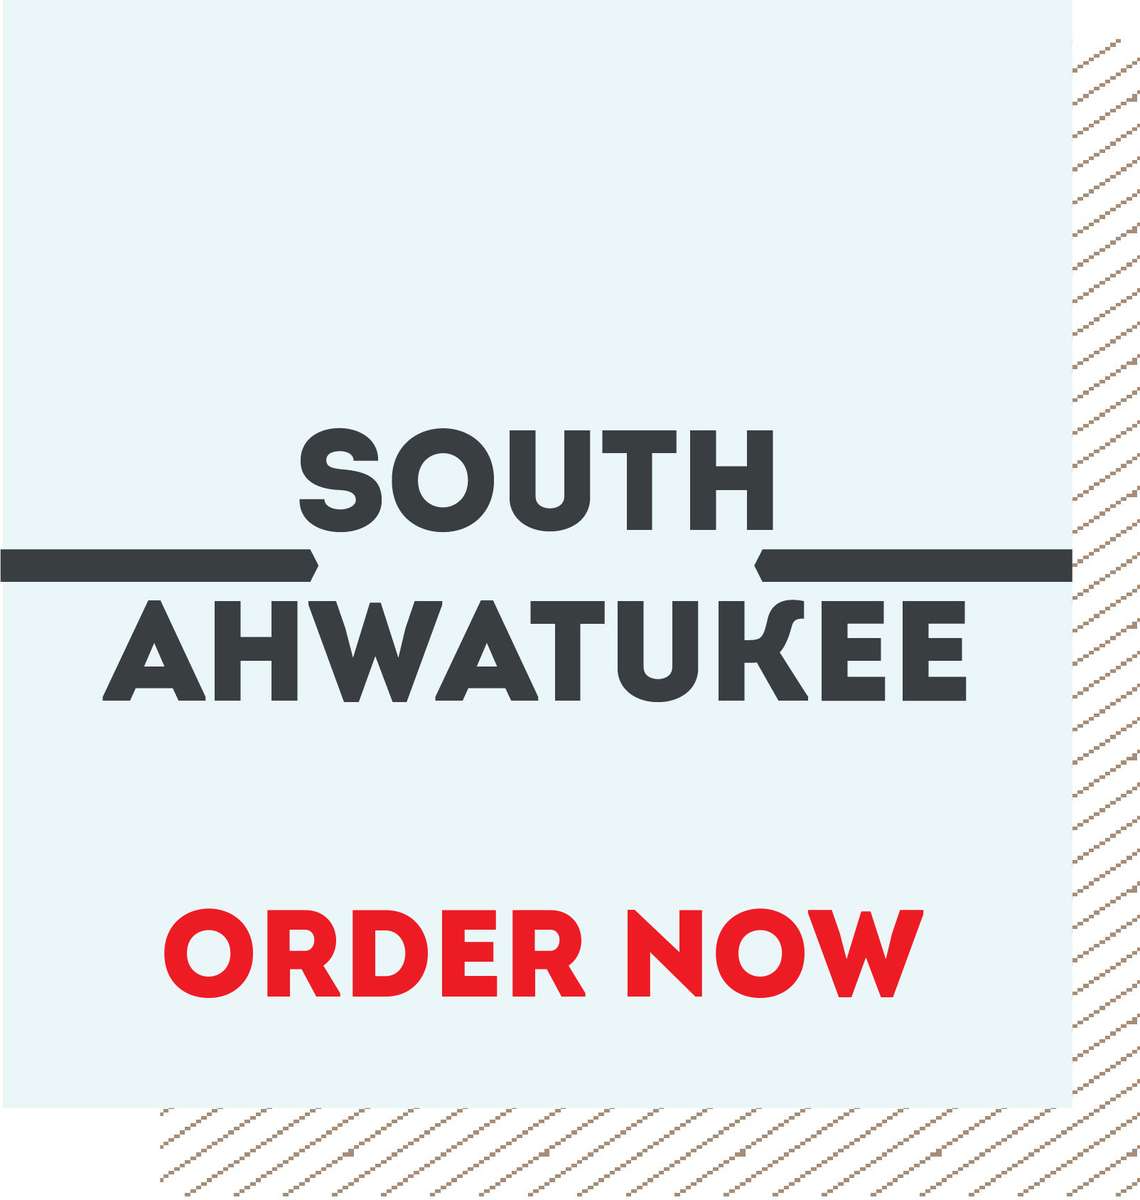 AHWATUKEE. Order now.